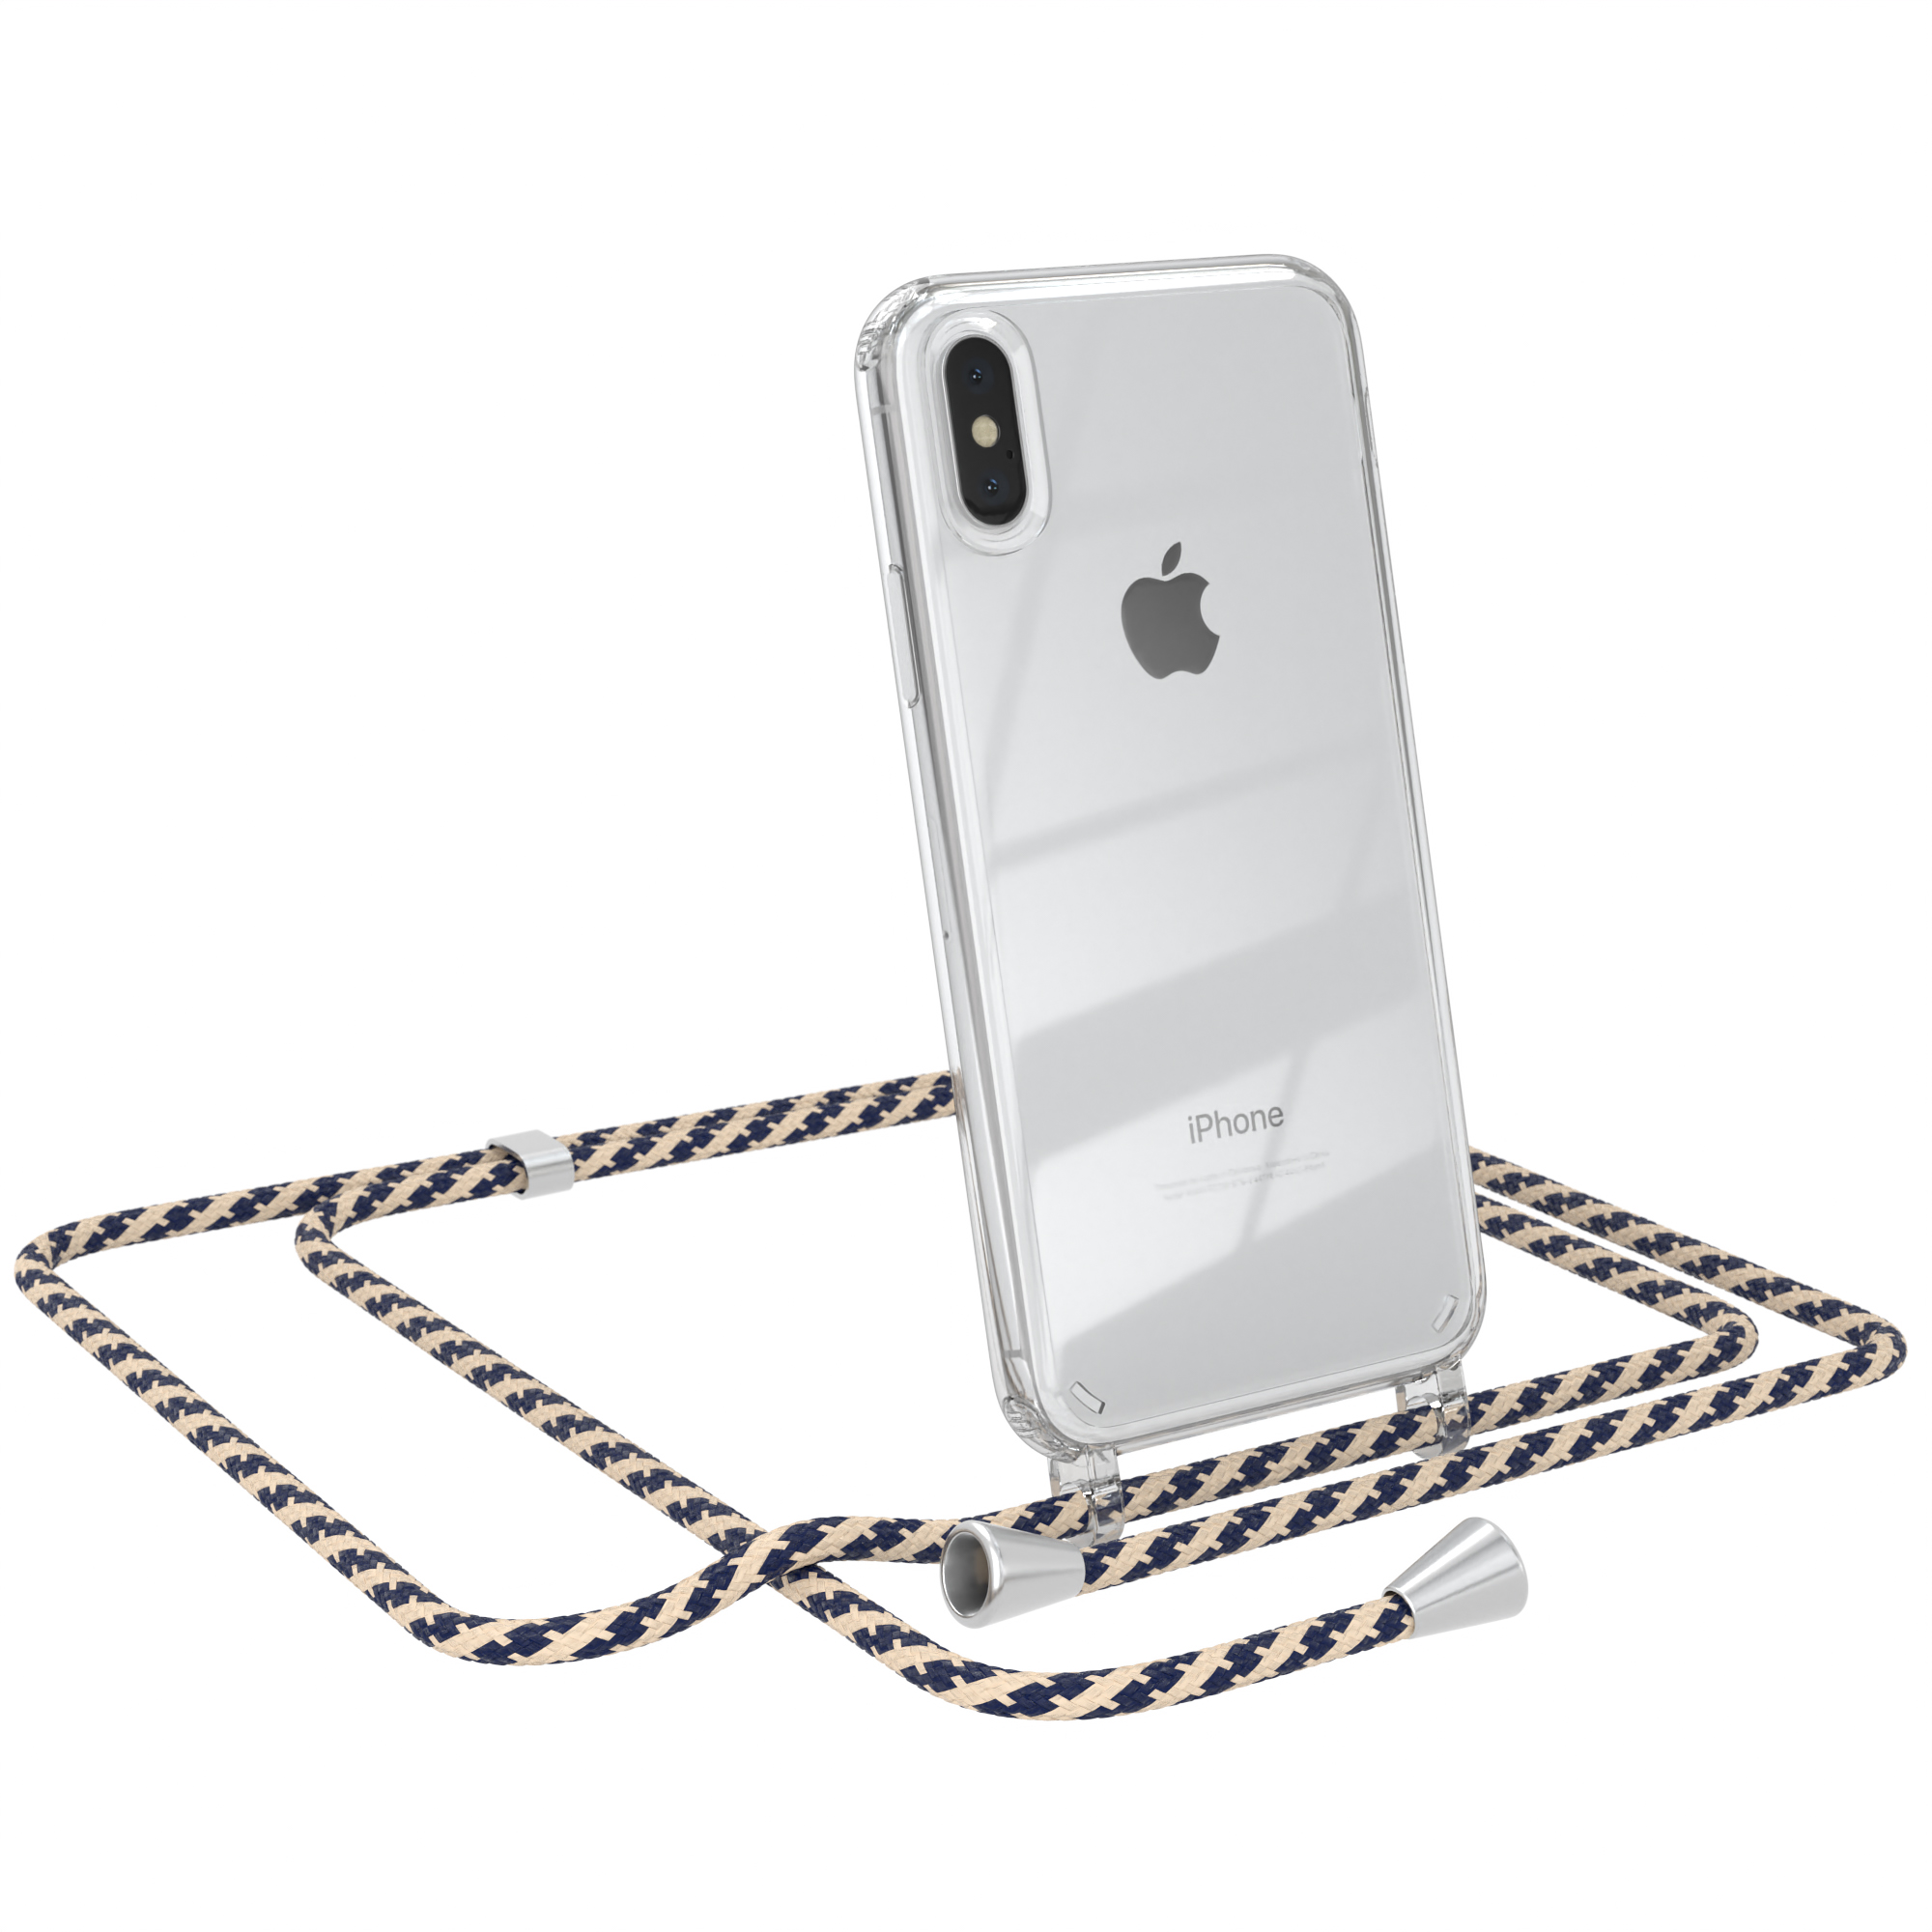 Umhängetasche, Camouflage Apple, / iPhone X EAZY Cover Clear CASE XS, Umhängeband, mit Taupe